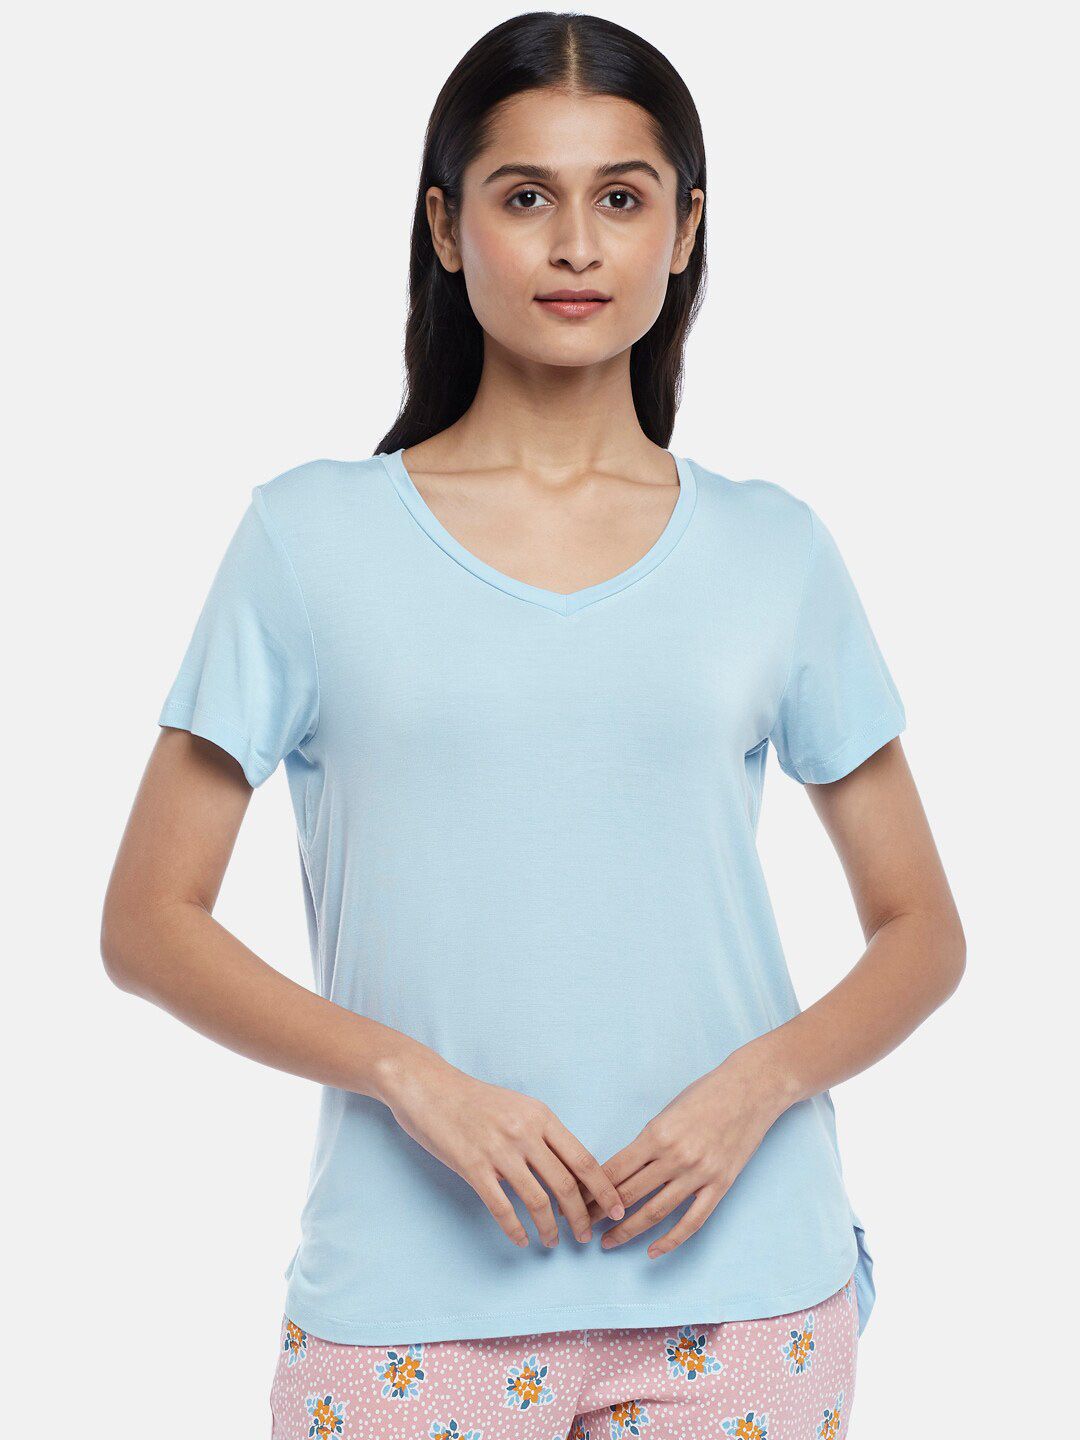 Dreamz by Pantaloons Blue Lounge T-Shirt Price in India